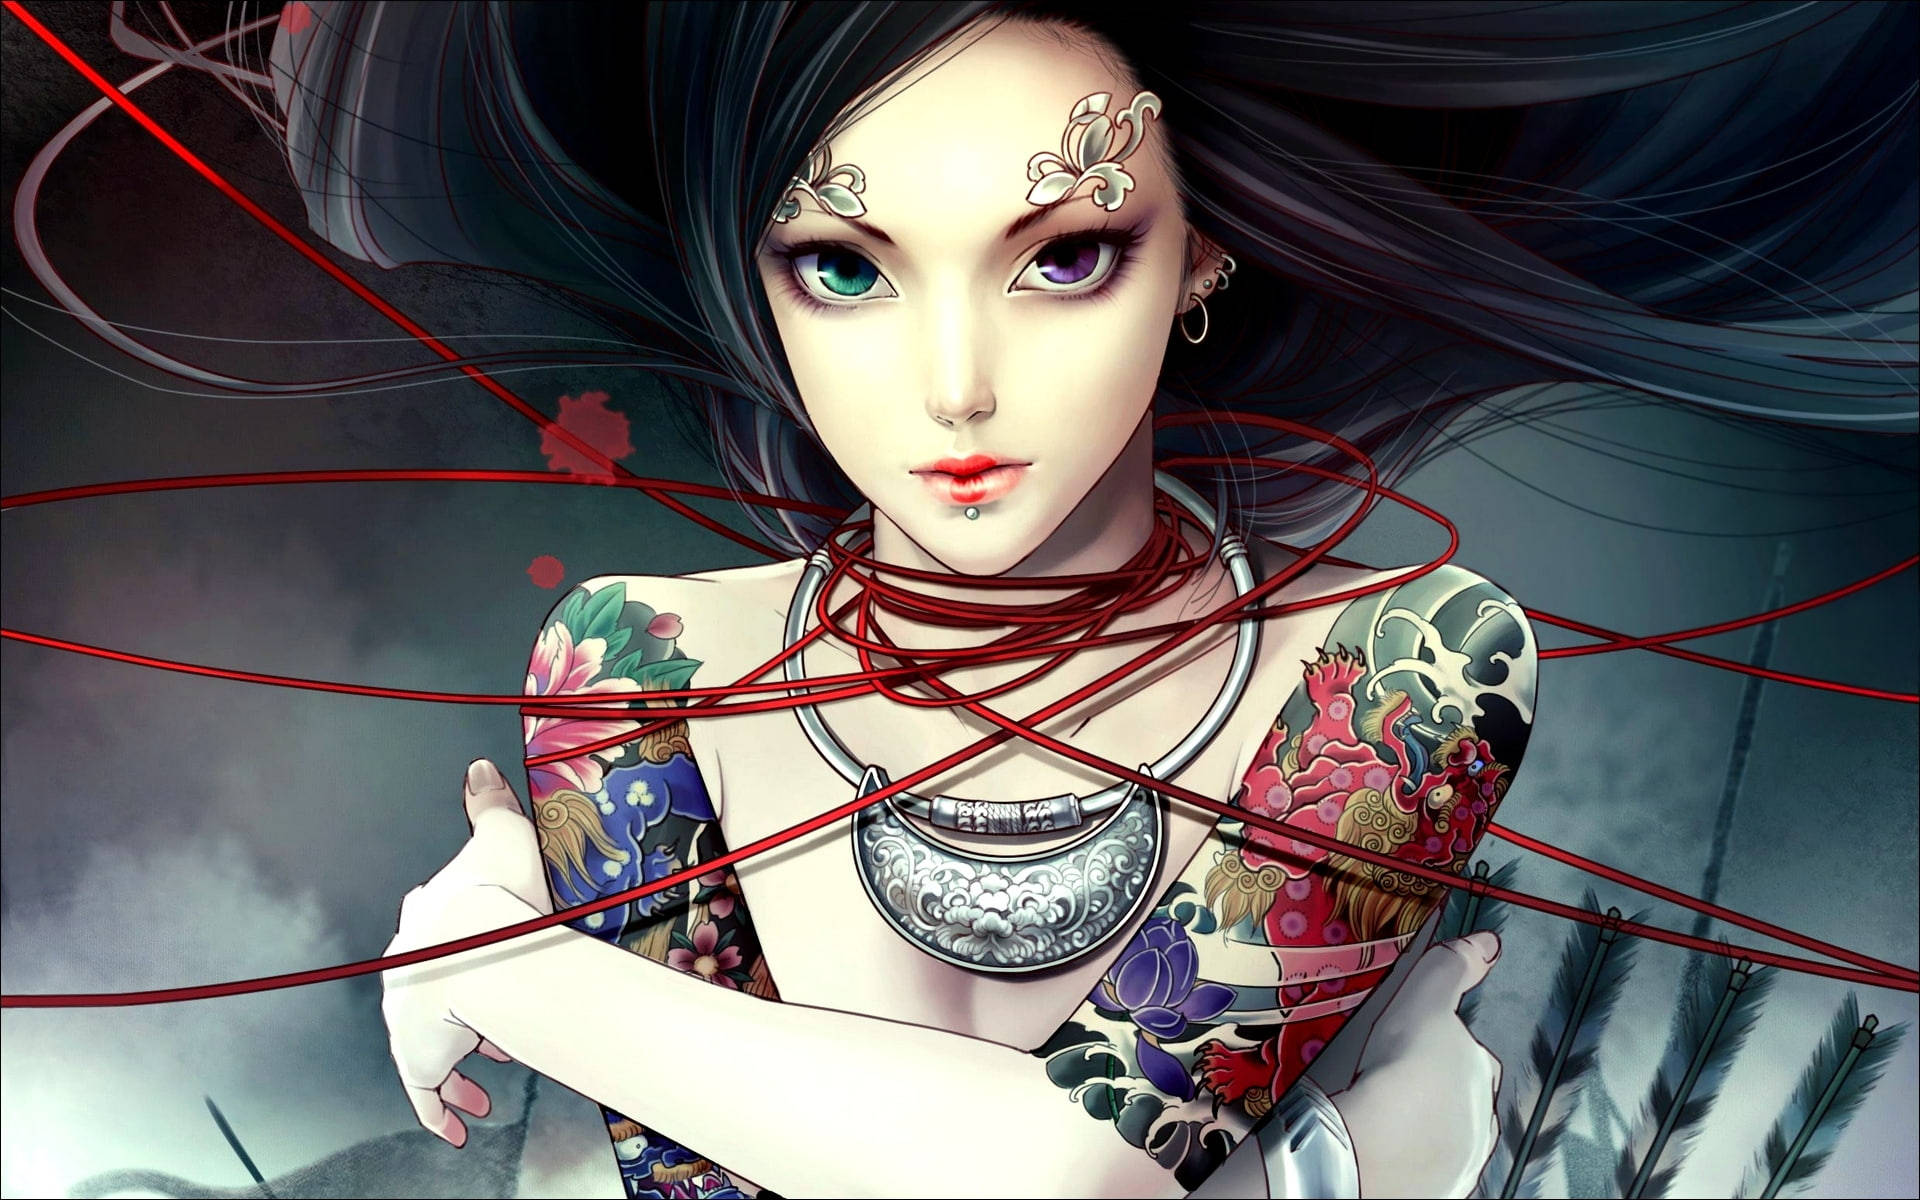 Sexy Anime Girl With Tattoos Wallpaper